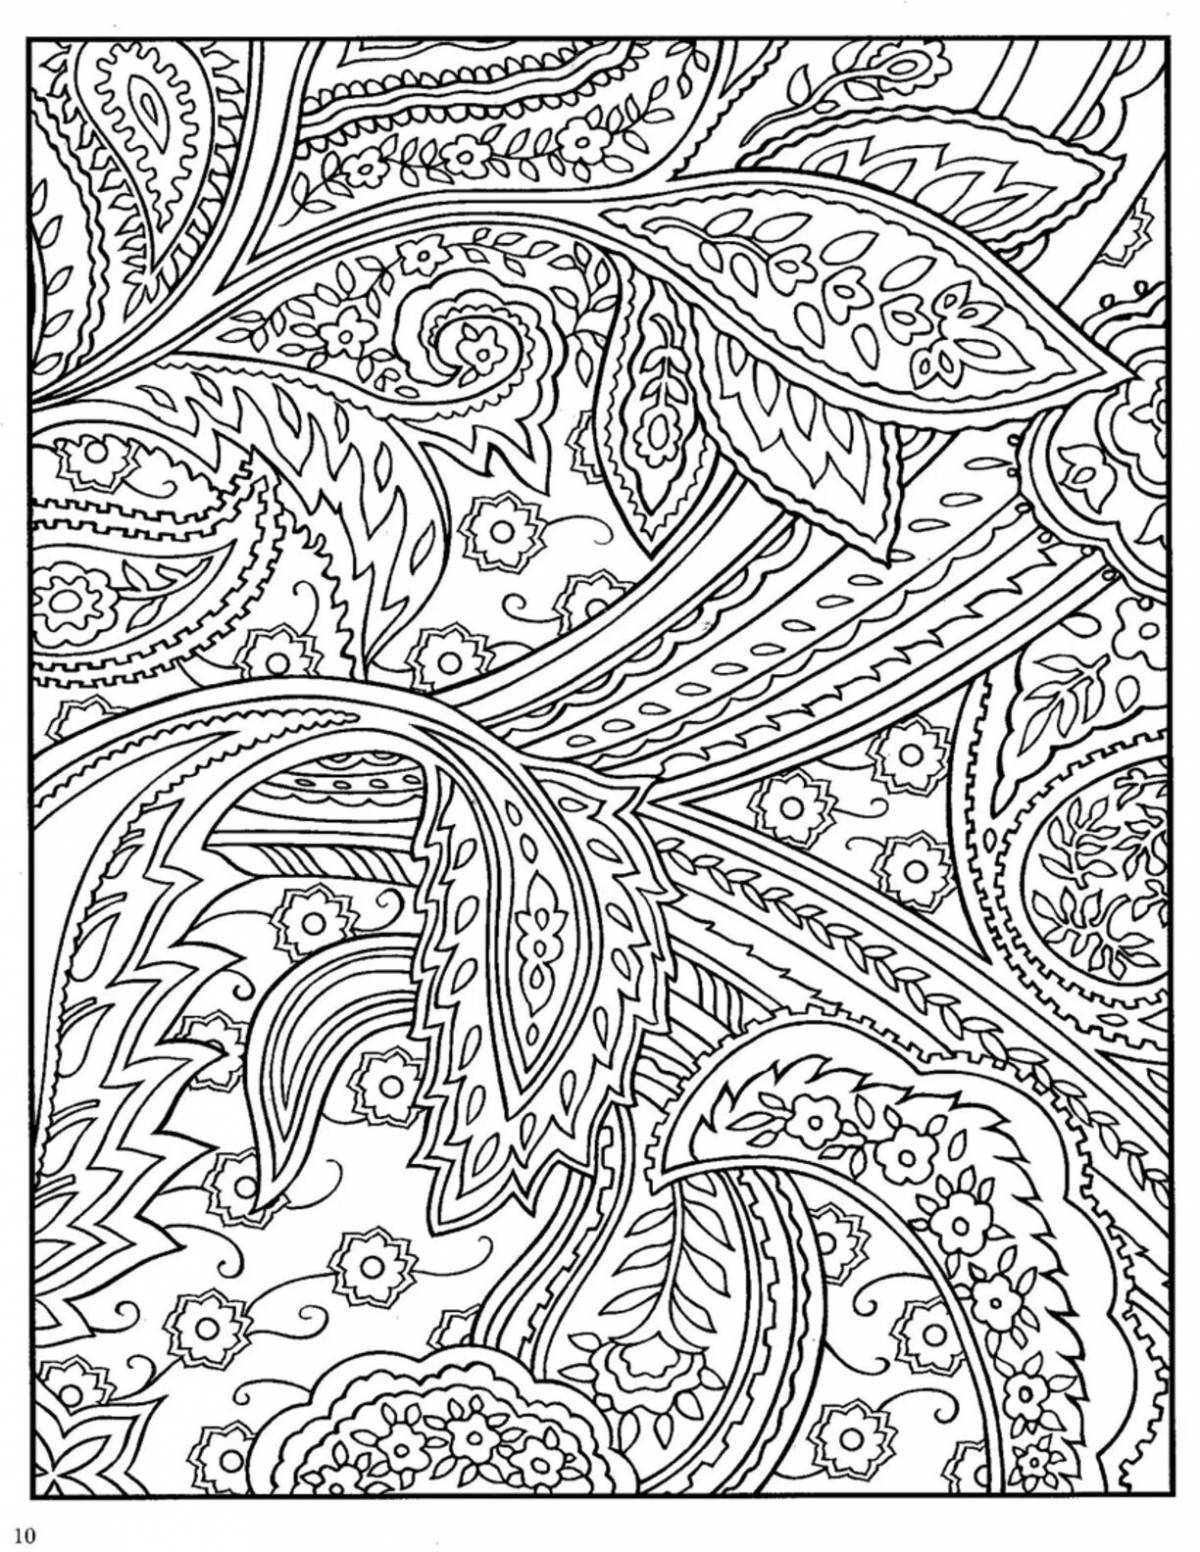 Coloring book intricate patterns - exquisite